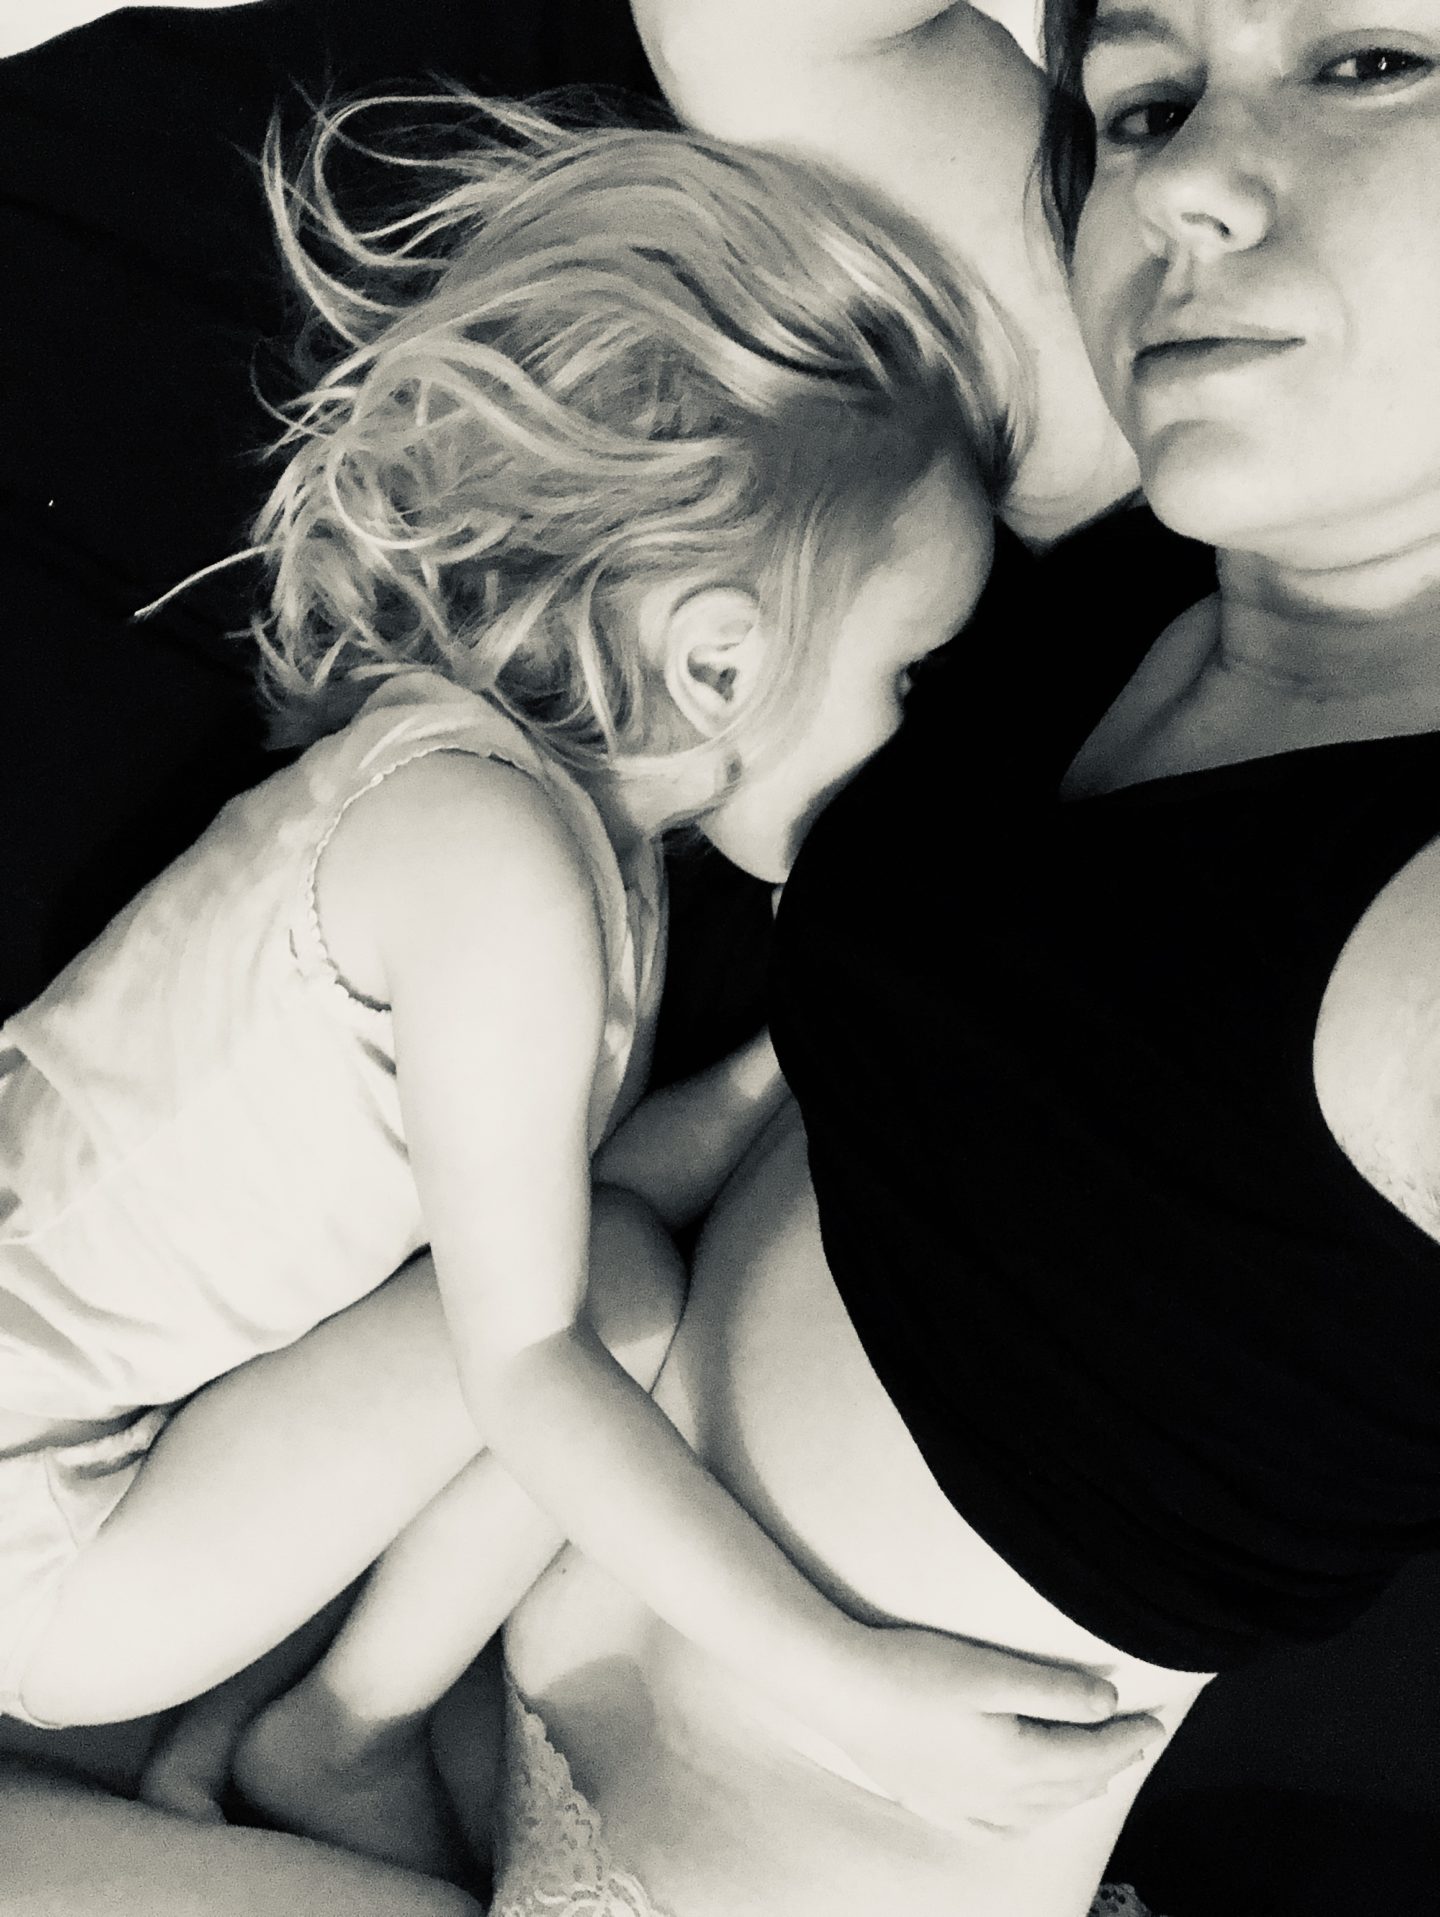 A 4 year old cuddling her mother whilst breastfeeding